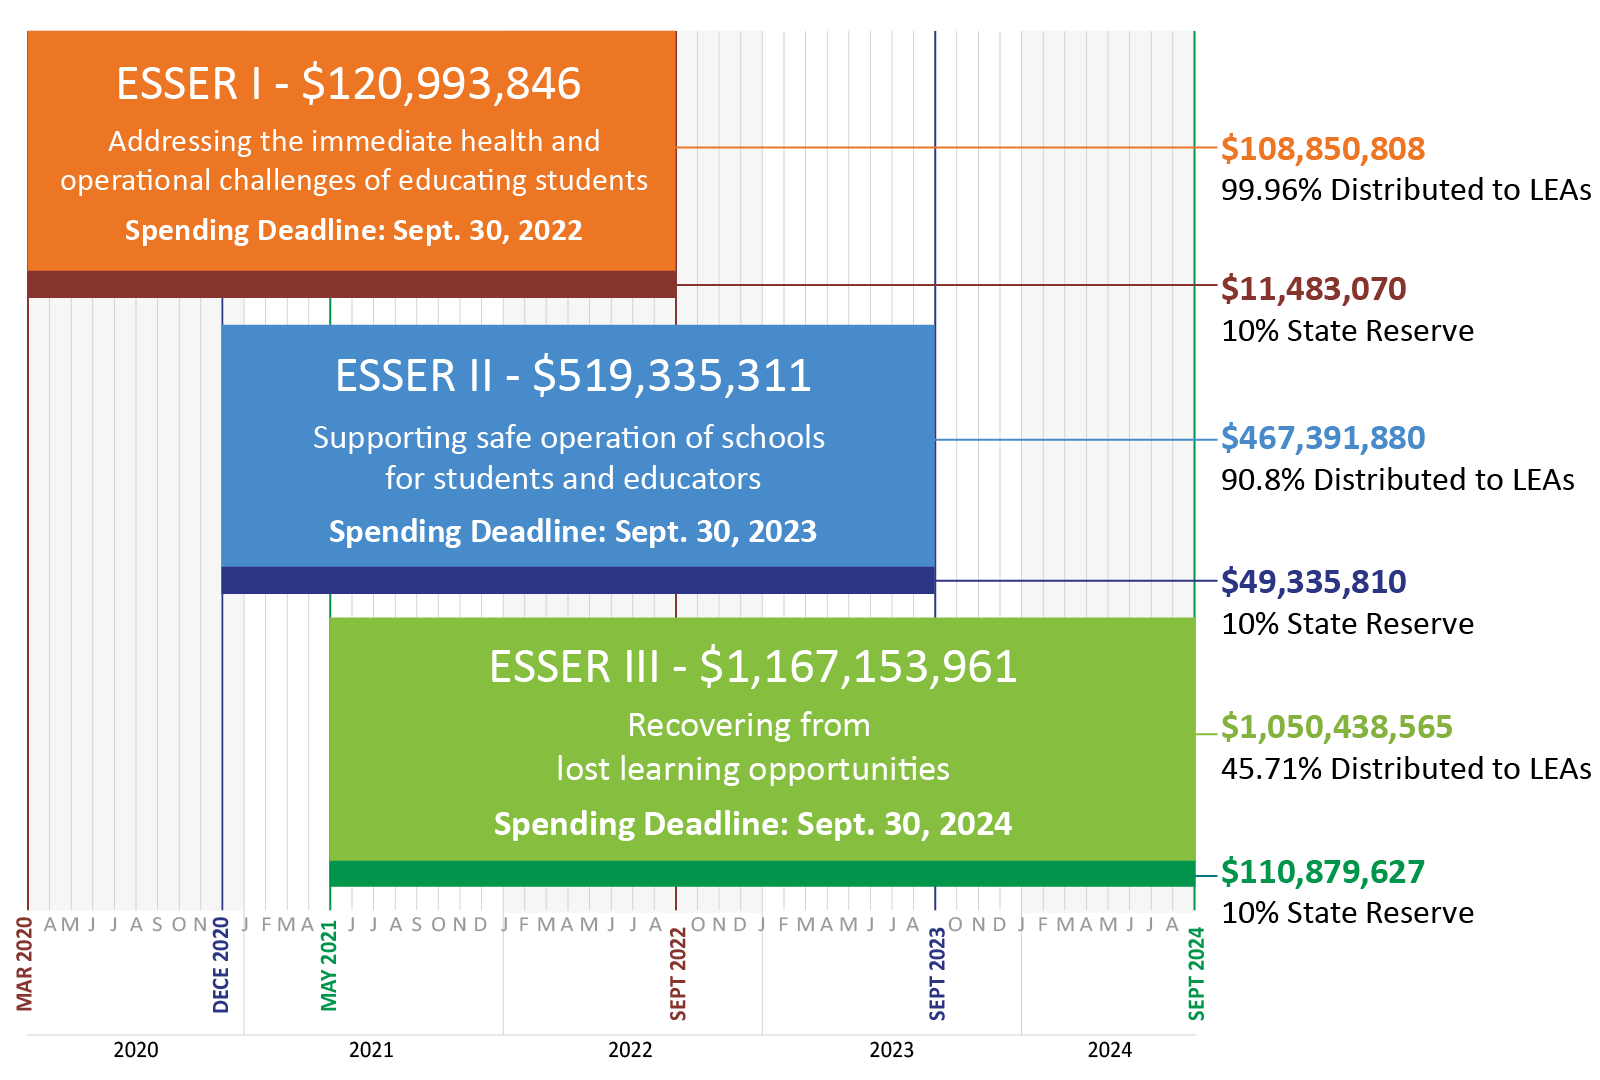 Chart with time frame showing March 2020 to September 2024. ESSER 1: $120,993,846 Addressing the immediate health and operational challenges of education students. Spending Deadline: Sept. 30, 2022. $108,850,808 (99.96% Distributed to LEAs) $11,483,070 (10% State Reserve) ESSER 2: $519,335,311 Supporting safe operation of schools for students and educators. Spending Deadline: Sept. 30, 2023. $467,391,880 (90% Distributed to LEAs) $49,335,810 (10% State Reserve) ESSER 3: $1,167,153,961 Recovering from lost l